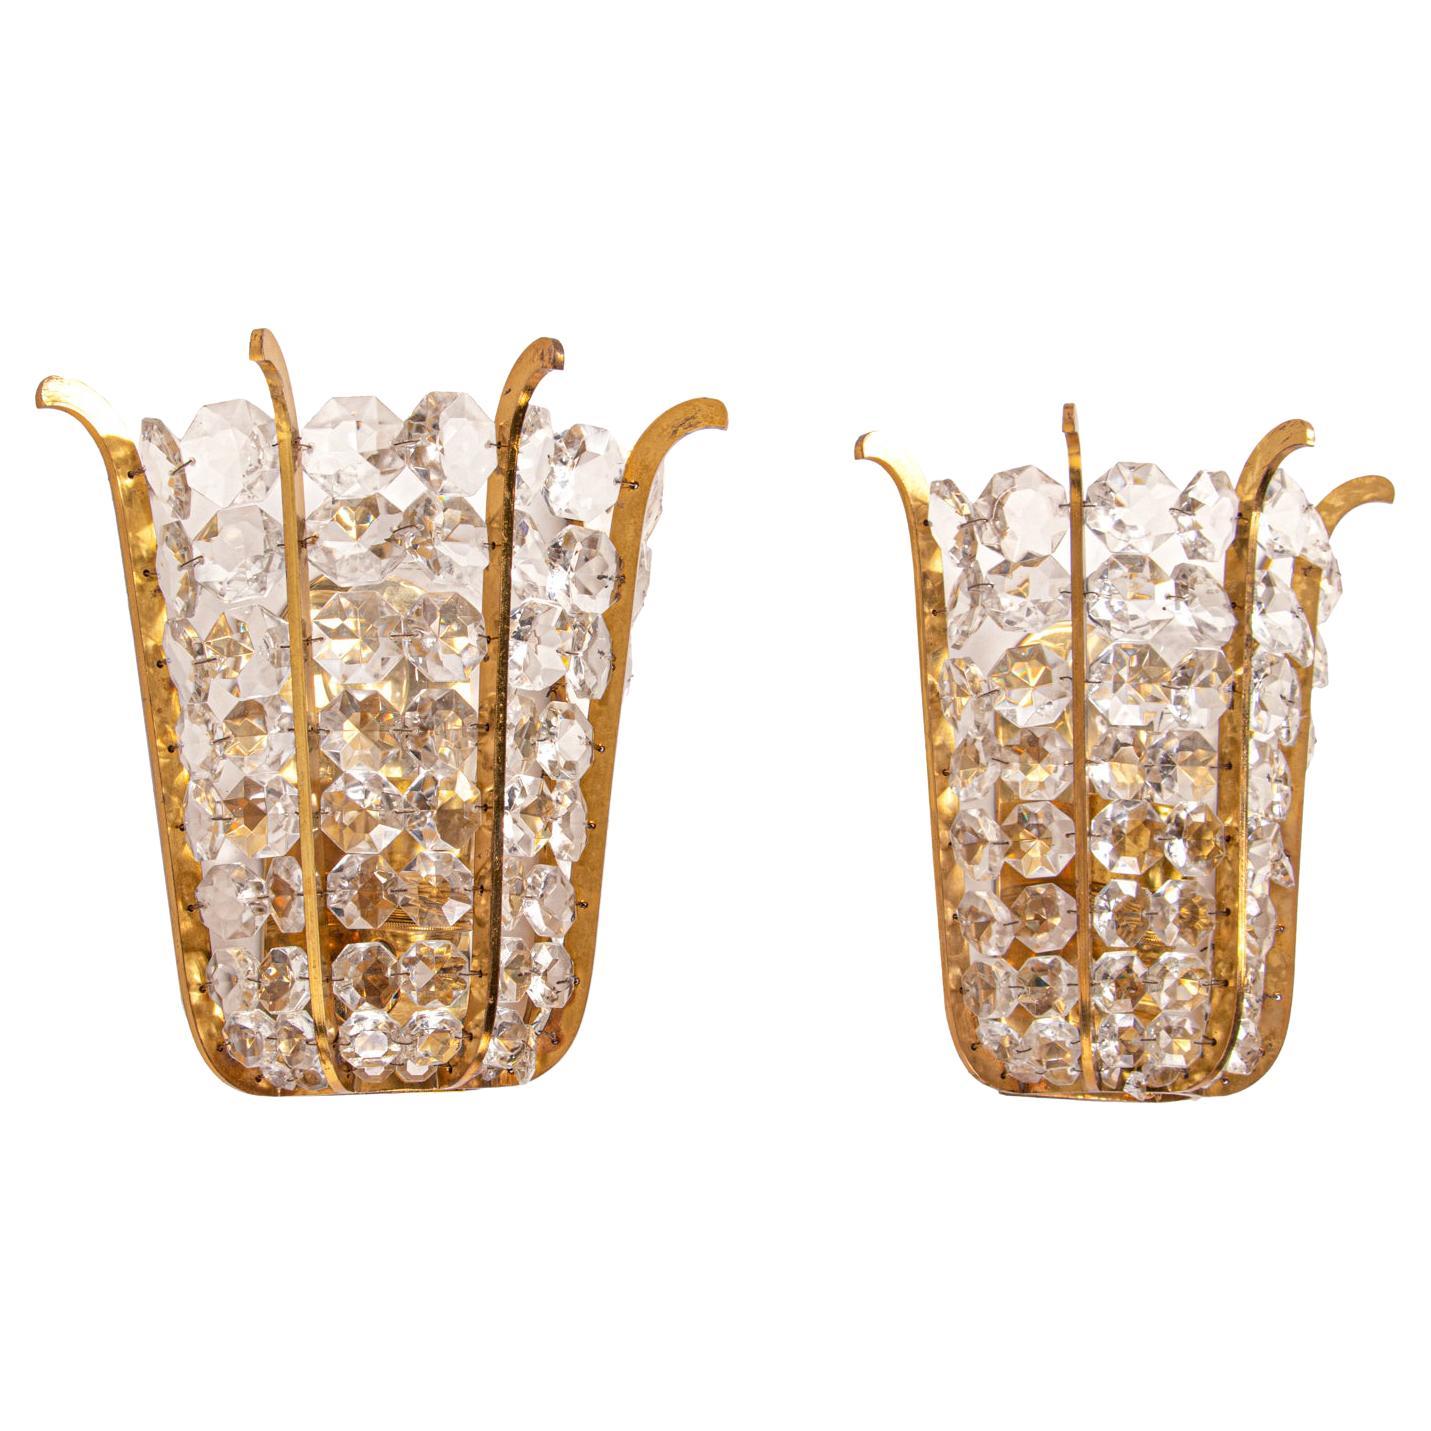 1960 Austria Bakalowits Pair of Wall Sconces Faceted Crystals & Brass For Sale